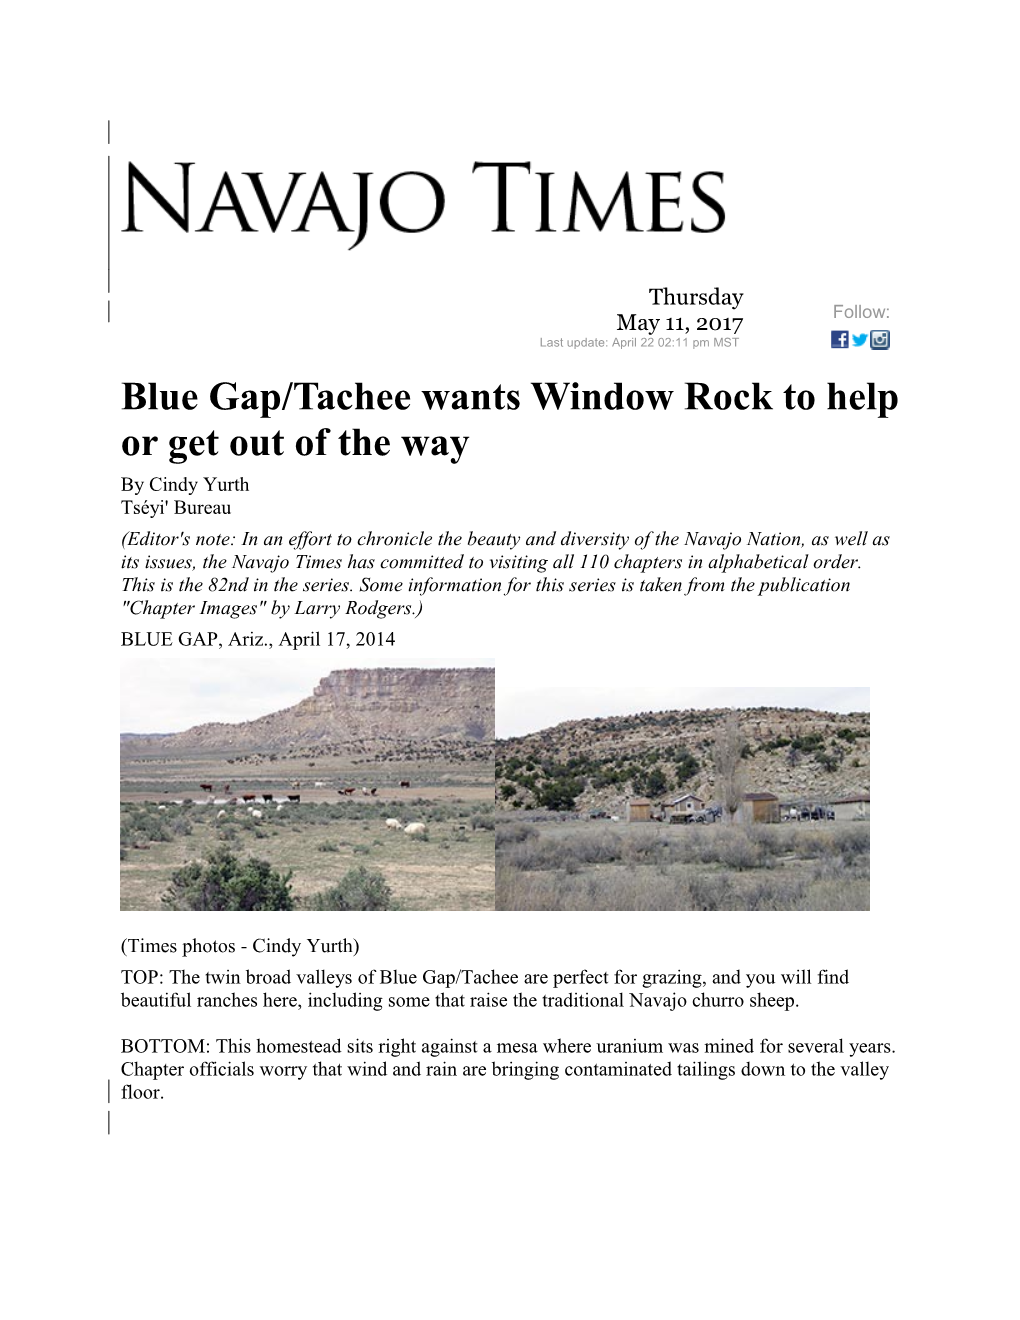 Blue Gap/Tachee Wants Window Rock to Help Or Get out of the Way